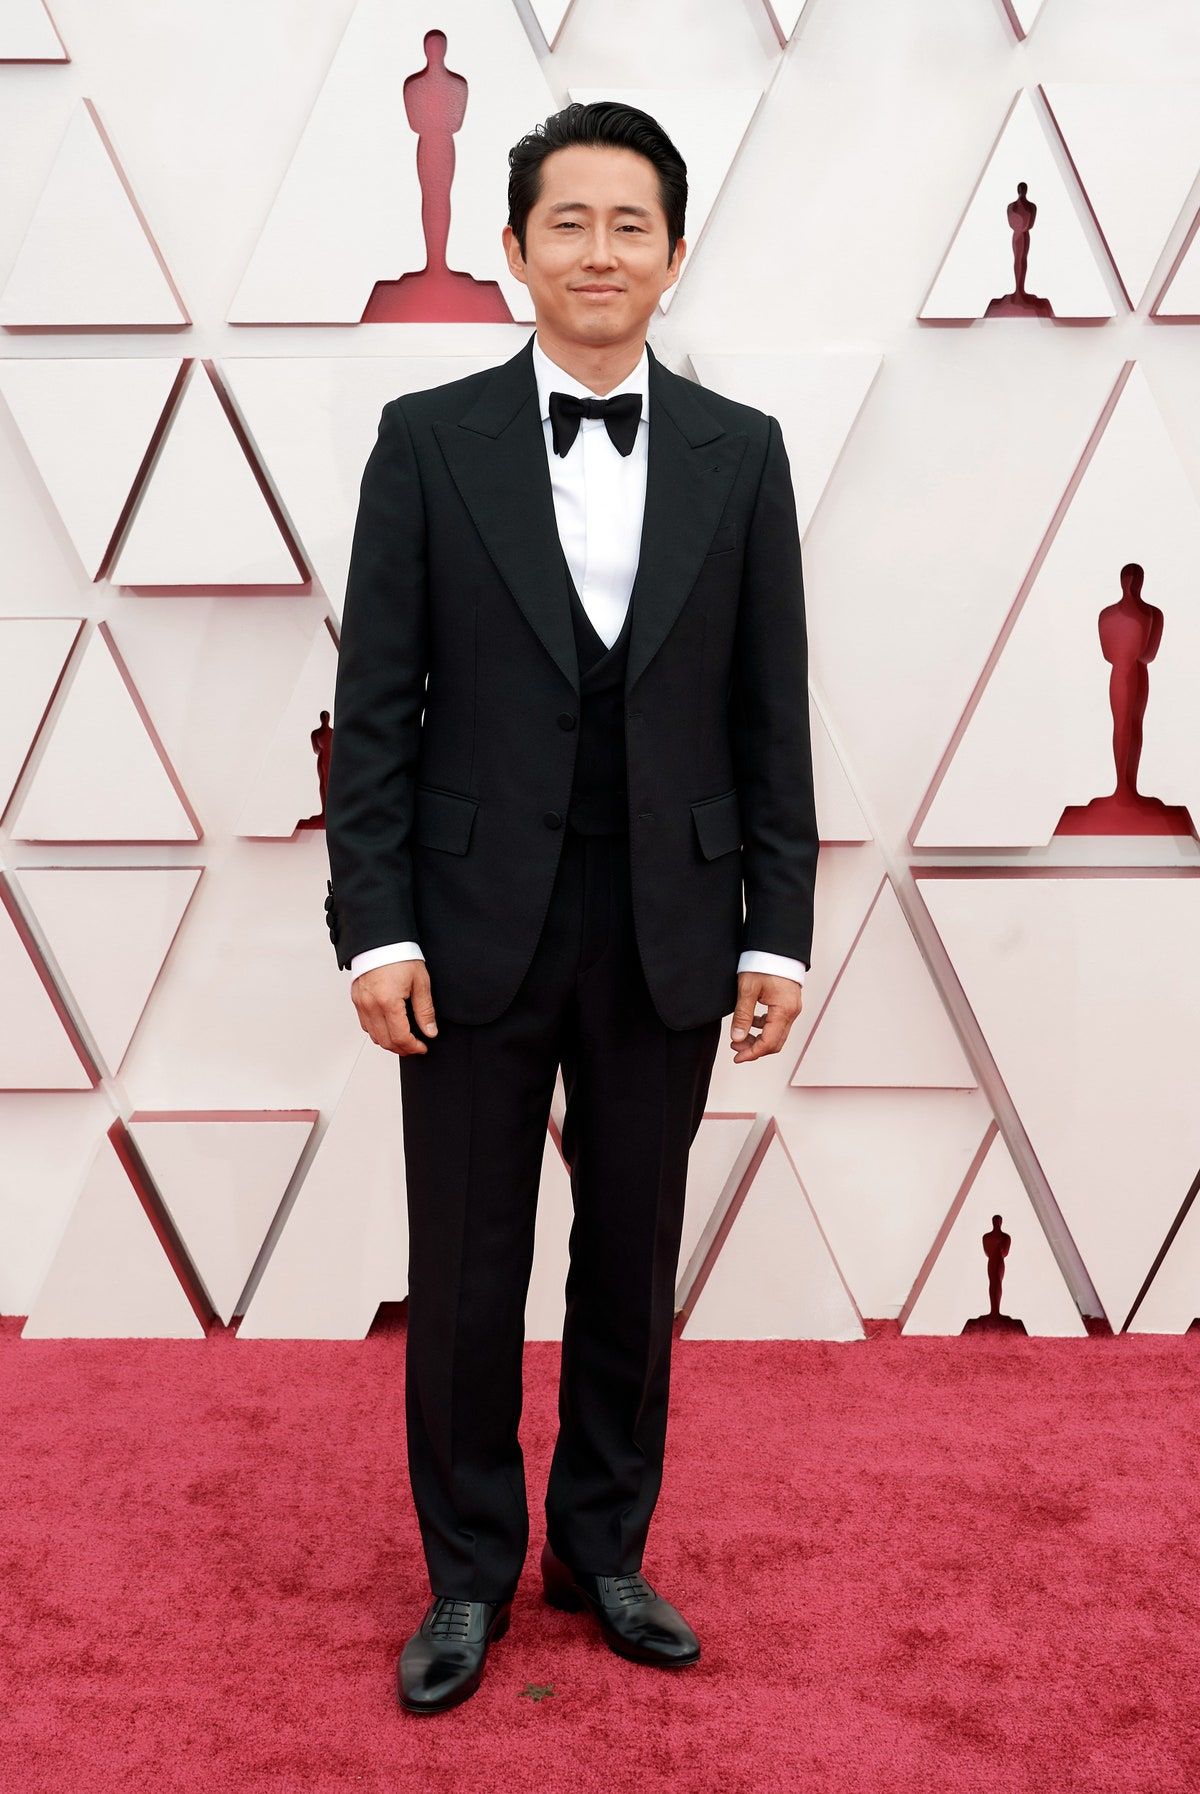 The 11 Best Dressed Men at the Oscars Global Fashion Report